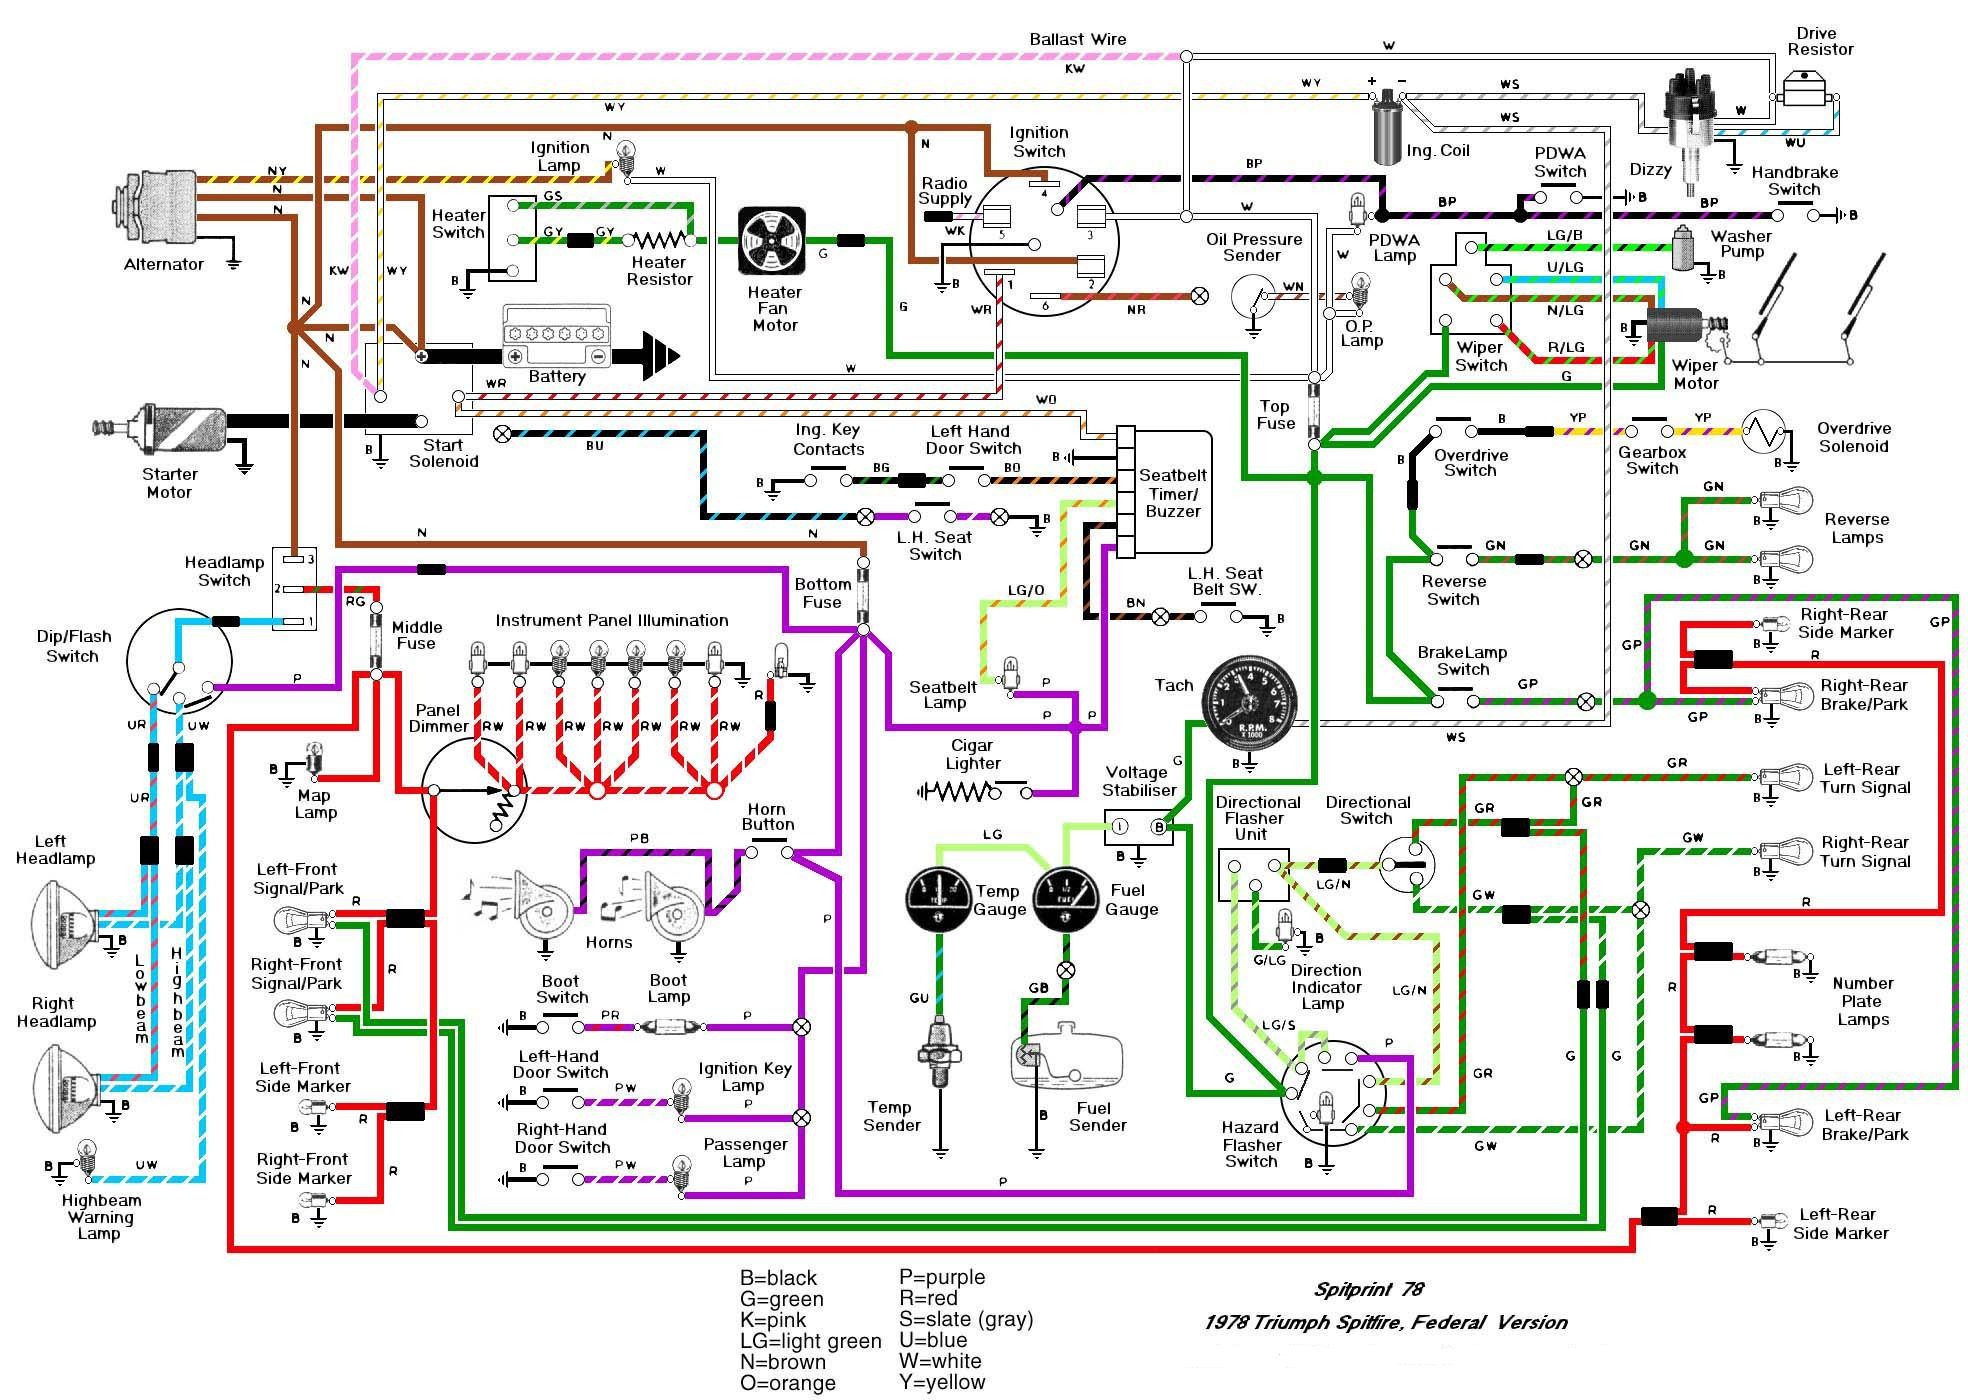 How To Read Auto Wiring Diagrams Best Read Automotive Wiring Rh Uptuto At How To Read Auto Wiring Diagrams Best Read Automotive Wiring Diagram